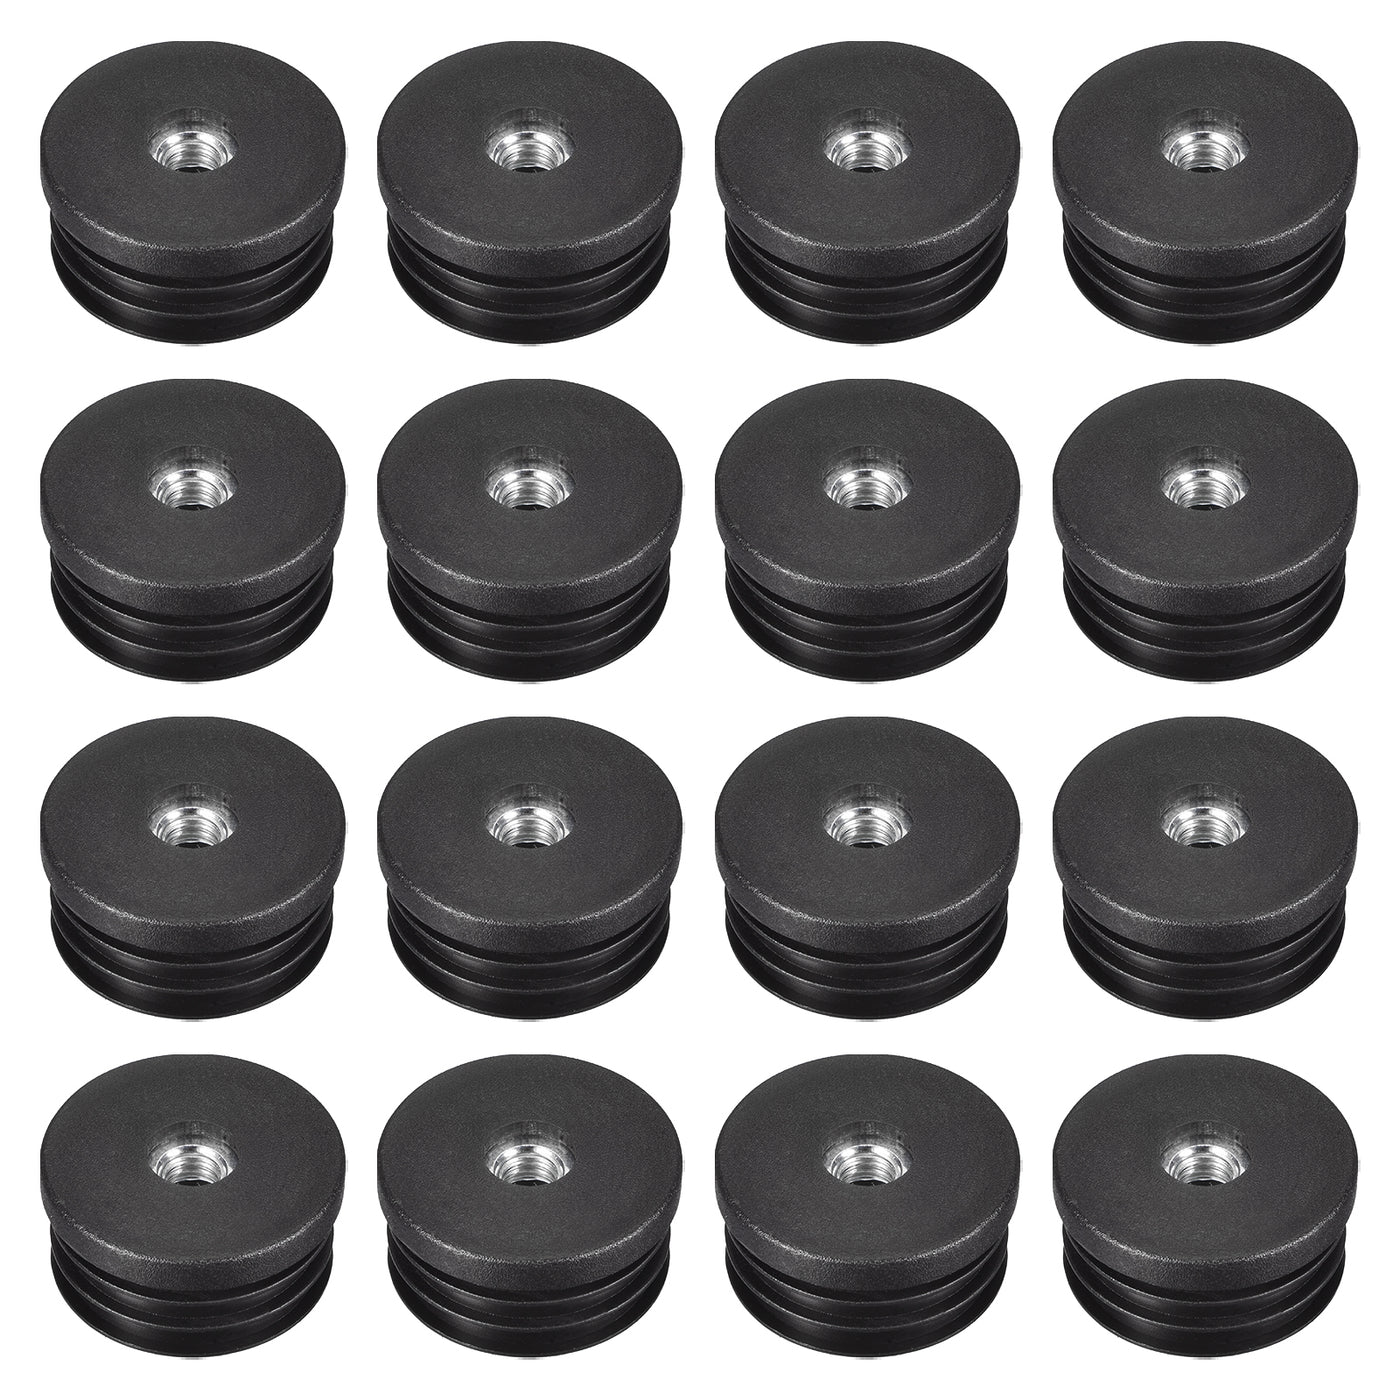 uxcell Uxcell 24Pcs 38mm/1.5" Caster Insert with Thread, Round M8 Thread for Furniture